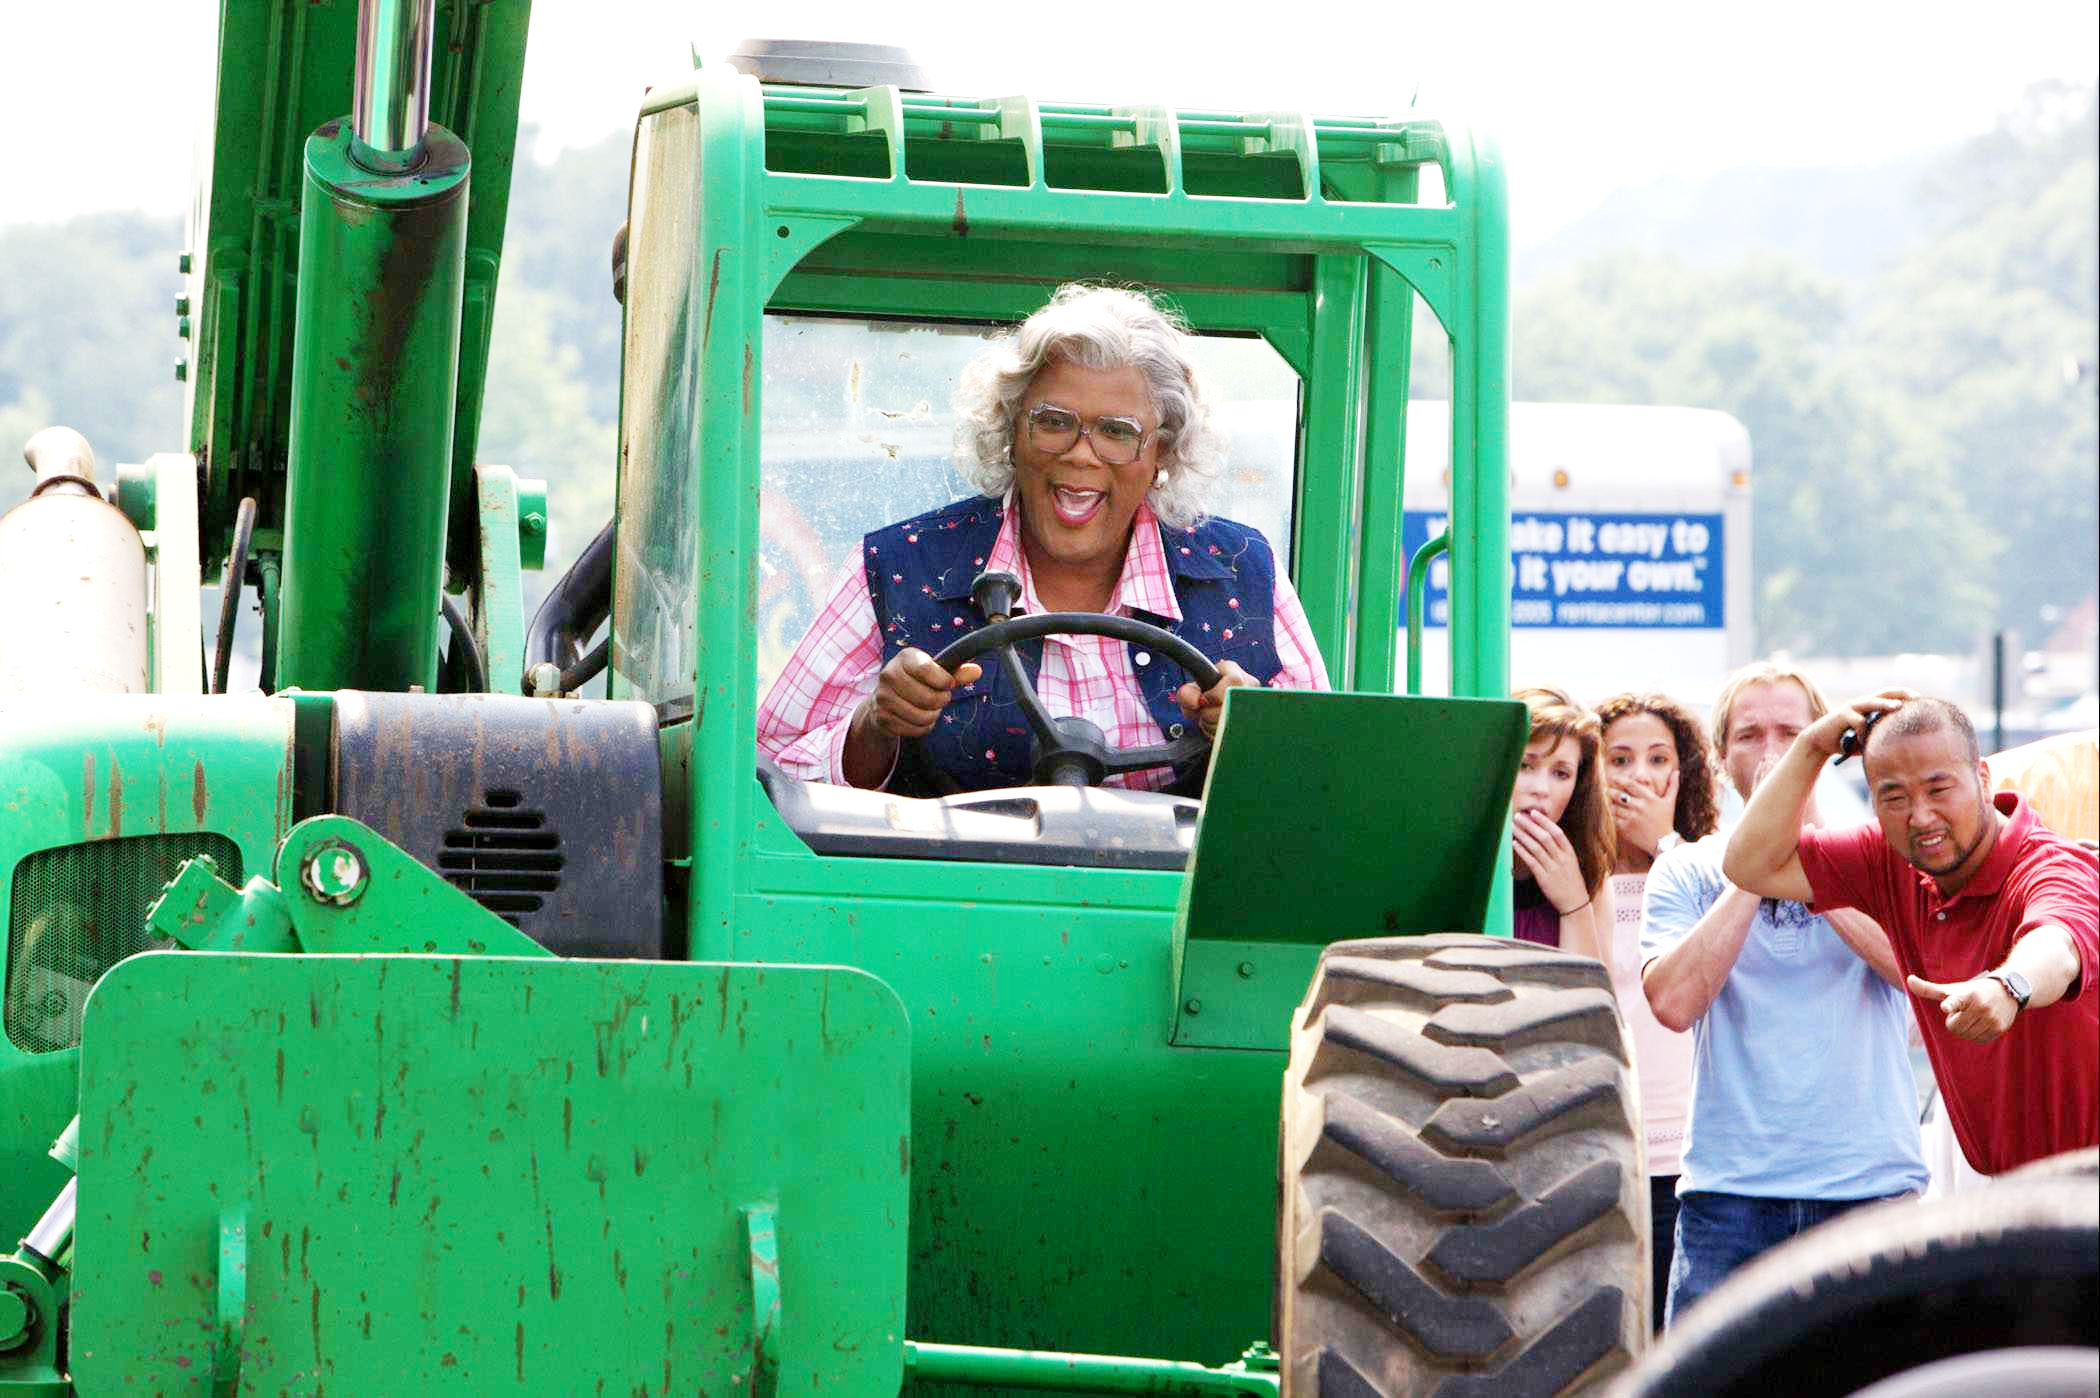 Tyler Perry stars as Madea in Lionsgate Films' Madea Goes to Jail (2009). Photo credit by Quantrell Colbert.